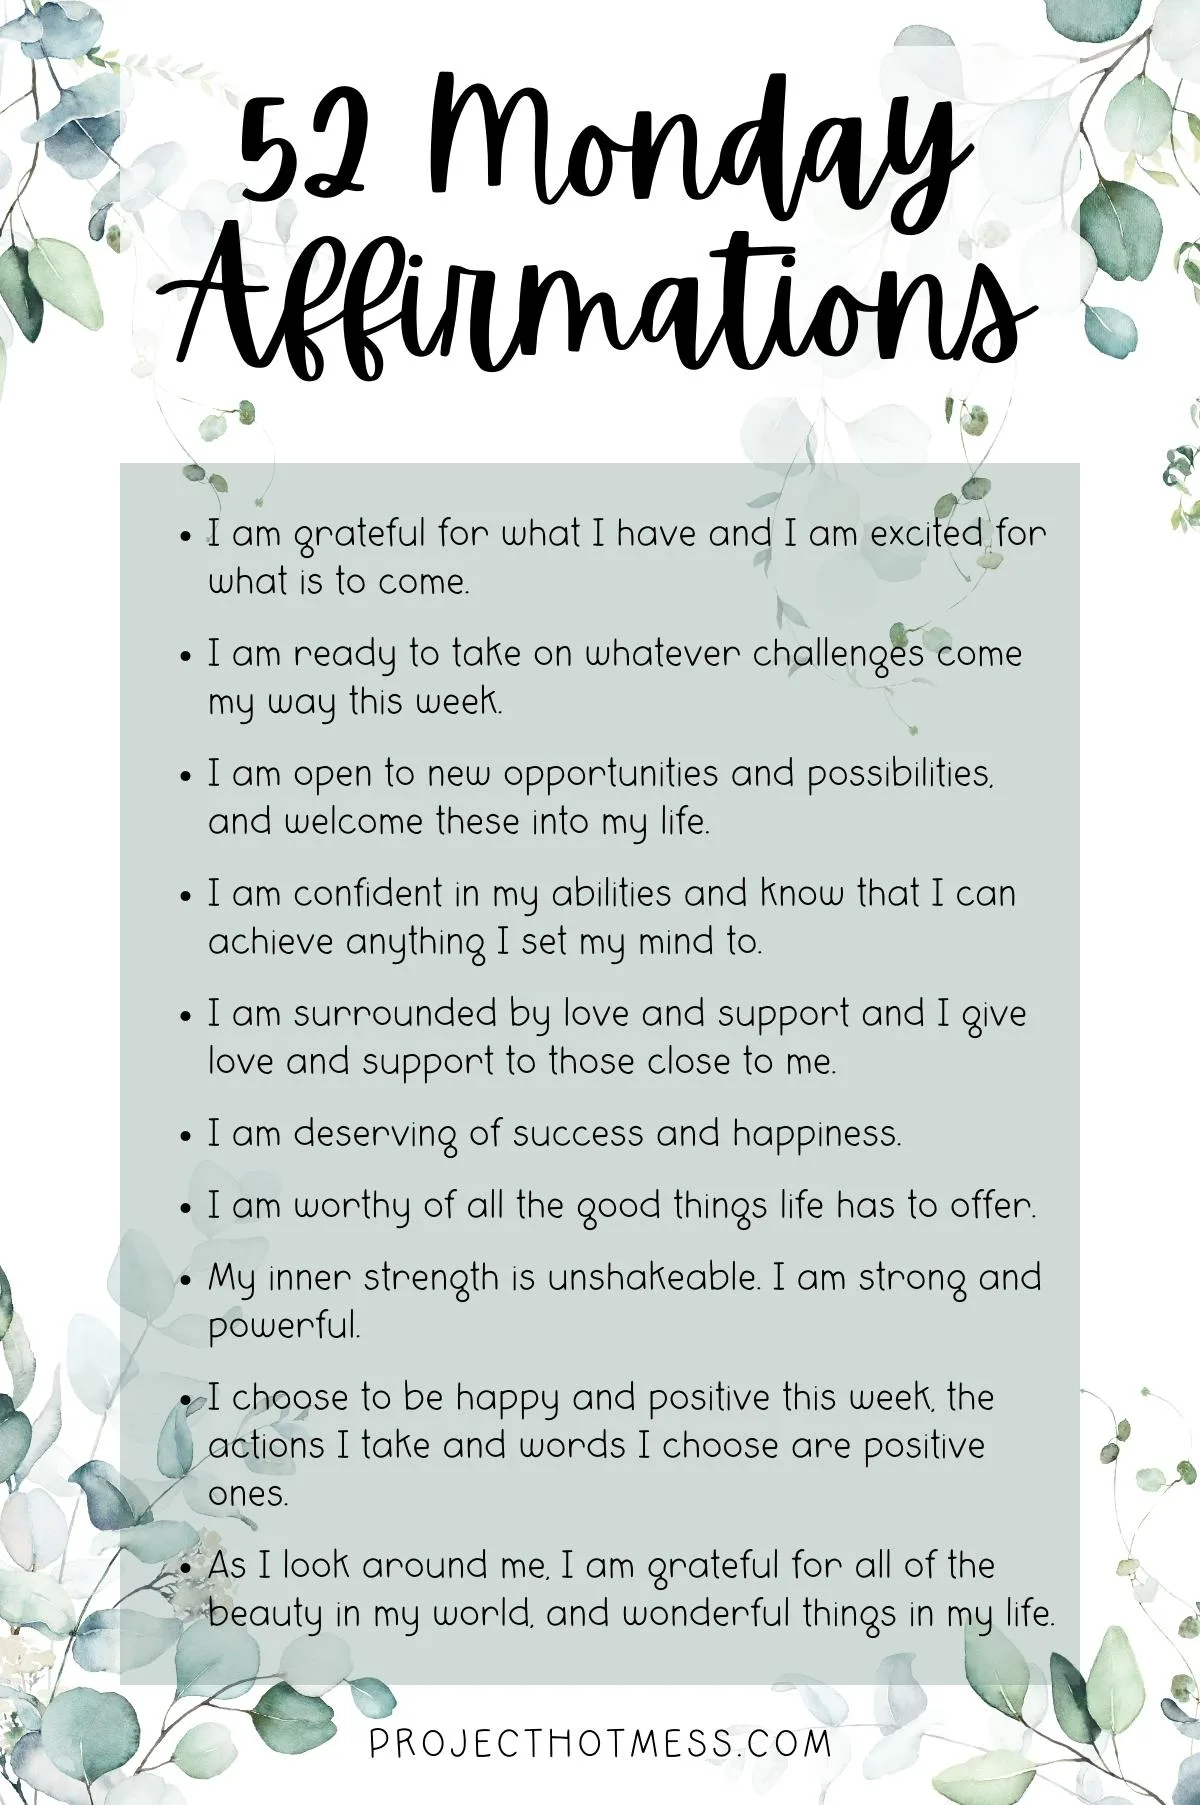 Select one of these positive Monday Affirmations to use in your Monday morning affirmation practice and start your week with a positive attitude. Click through to see all 52 Monday Affirmations. 